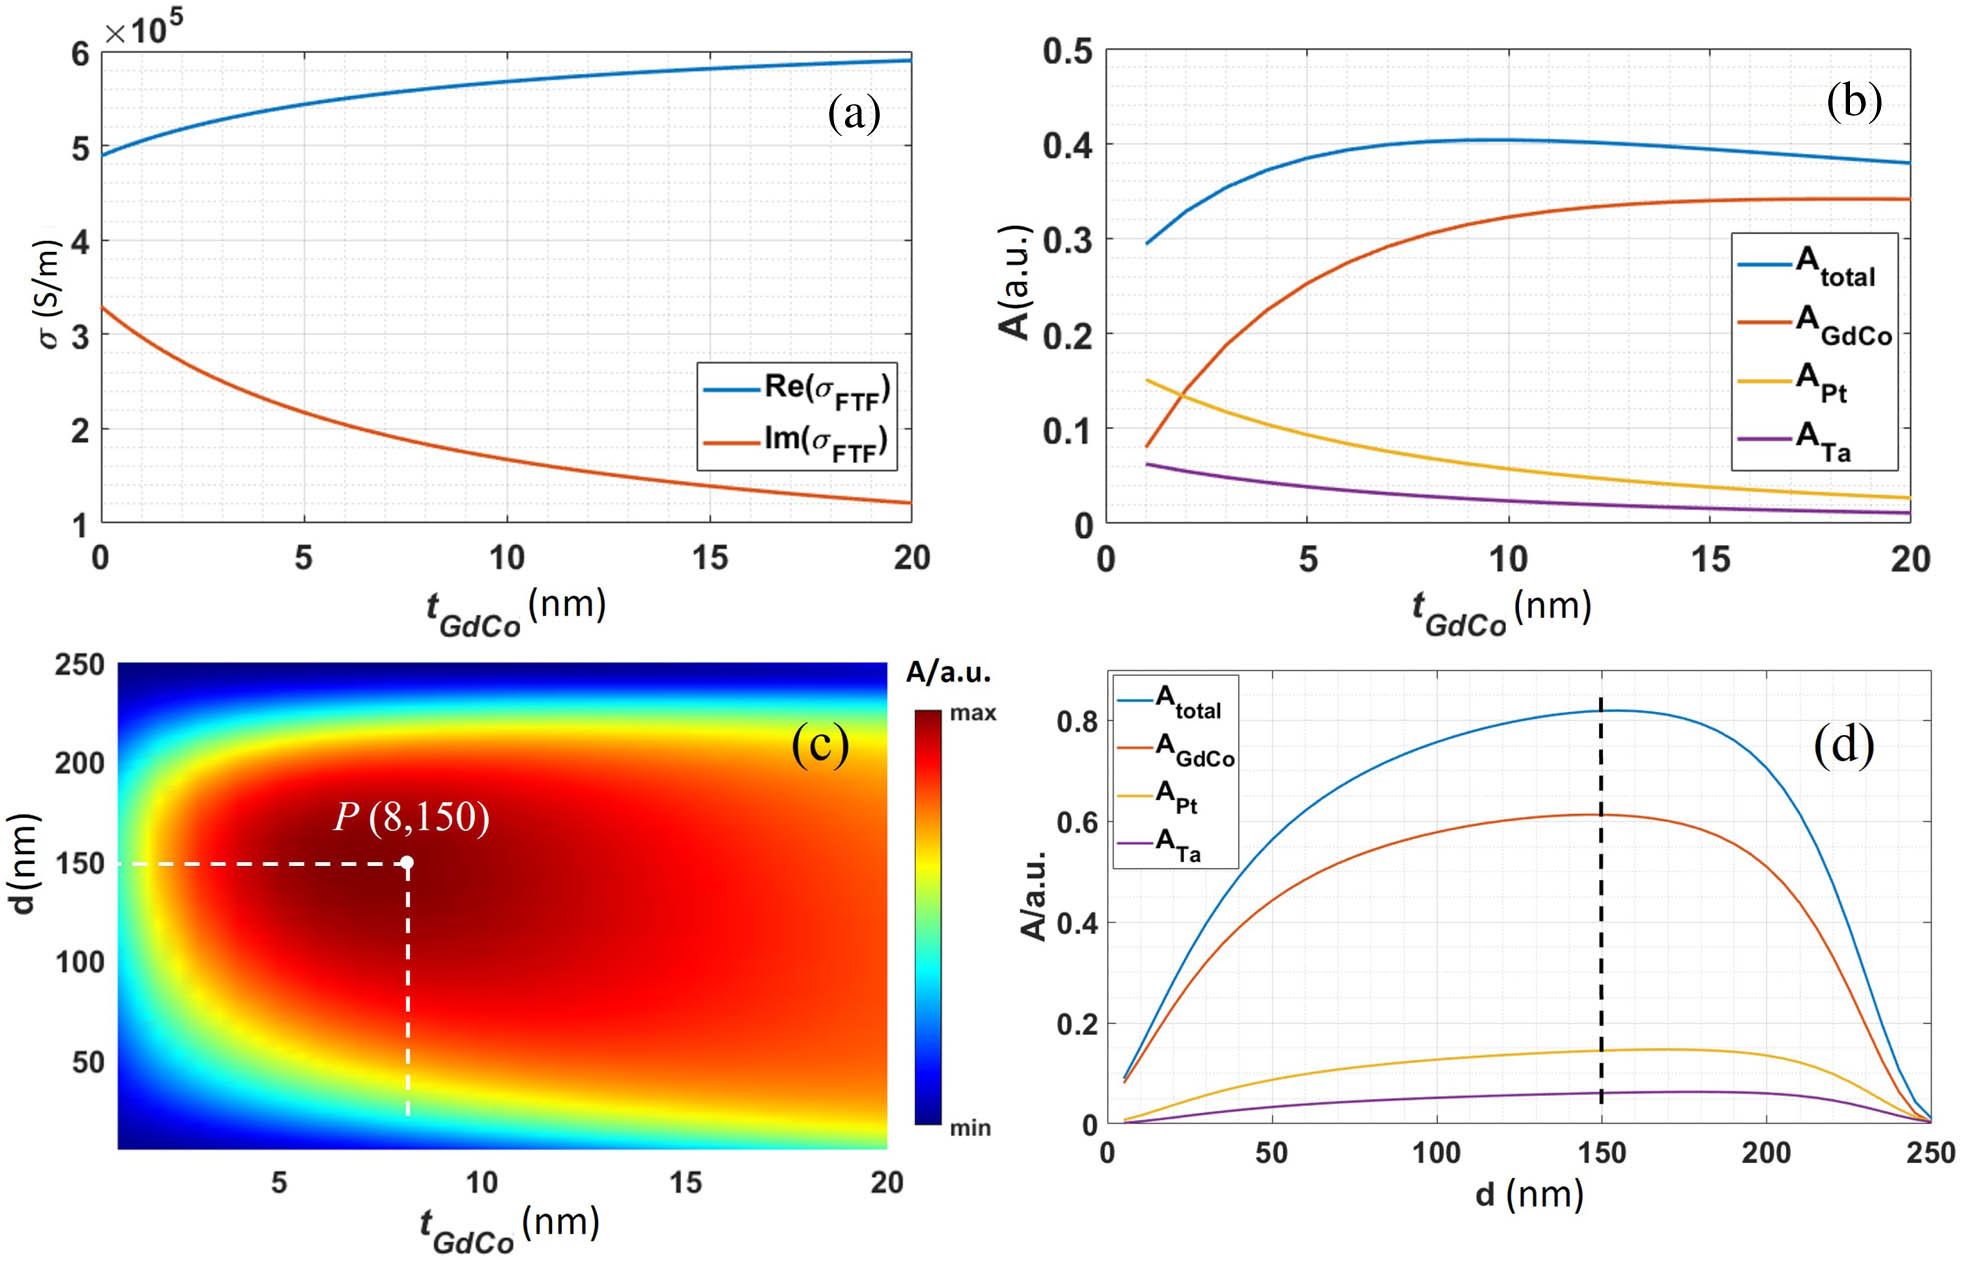 (a) Conductivity of the FTF as a function of the thickness of the GdCo alloy, and the thicknesses of Pt and Ta layers are 2 and 3 nm, respectively. (b) Optical absorption of each layer and the total absorption of the FTF under different thicknesses of the GdCo alloy. (c) Phase diagram of the optical absorption of the GdCo alloy as a function of its thickness tGdCo and the thickness of the inserted dielectric layer d. (d) Absorption of each layer of the CE-FTF under different thicknesses of the inserted dielectric layer d with the thickness of tGdCo=8 nm.